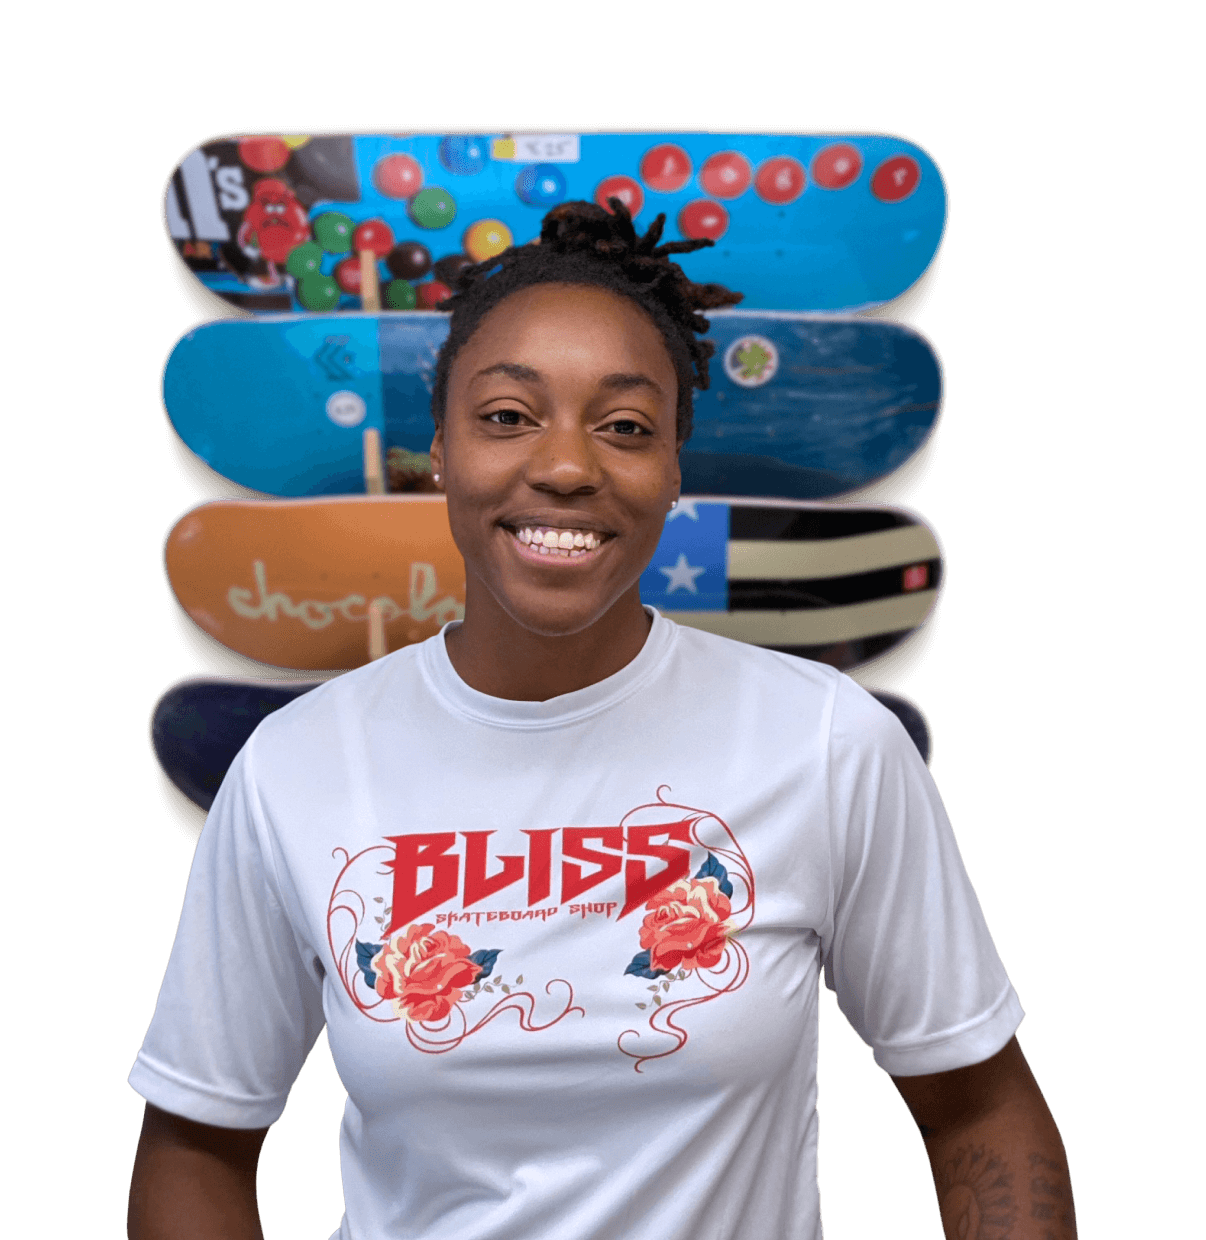 Sasha Senior, Founder of Bliss Skateboard Shop, stands and smiles in front on colourful skateboards mounted on a wall.